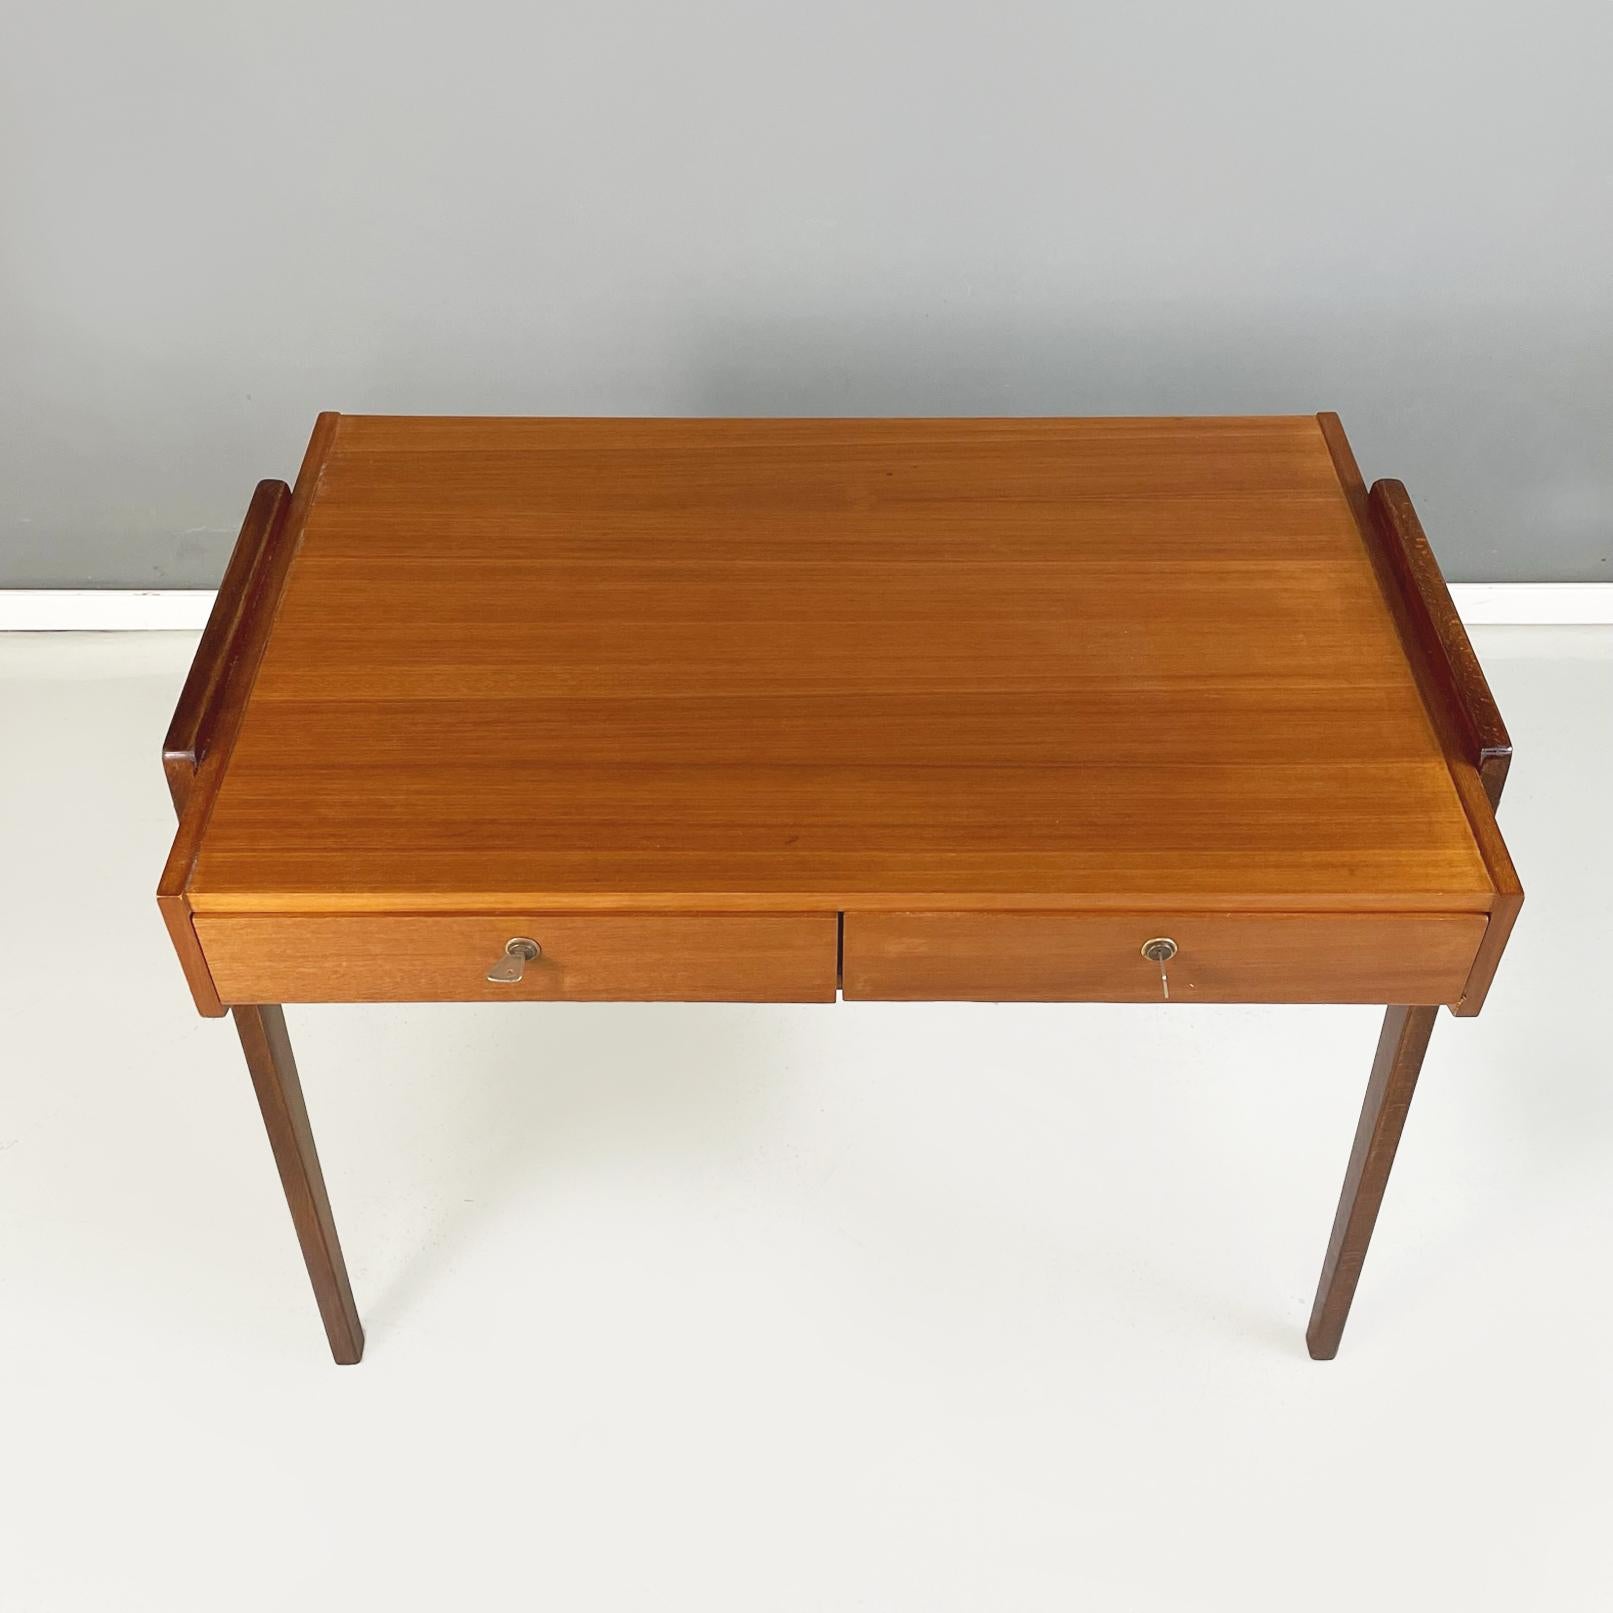 German Midcentury Wooden Desk with Drawers and Brass Details, circa 1960s 1